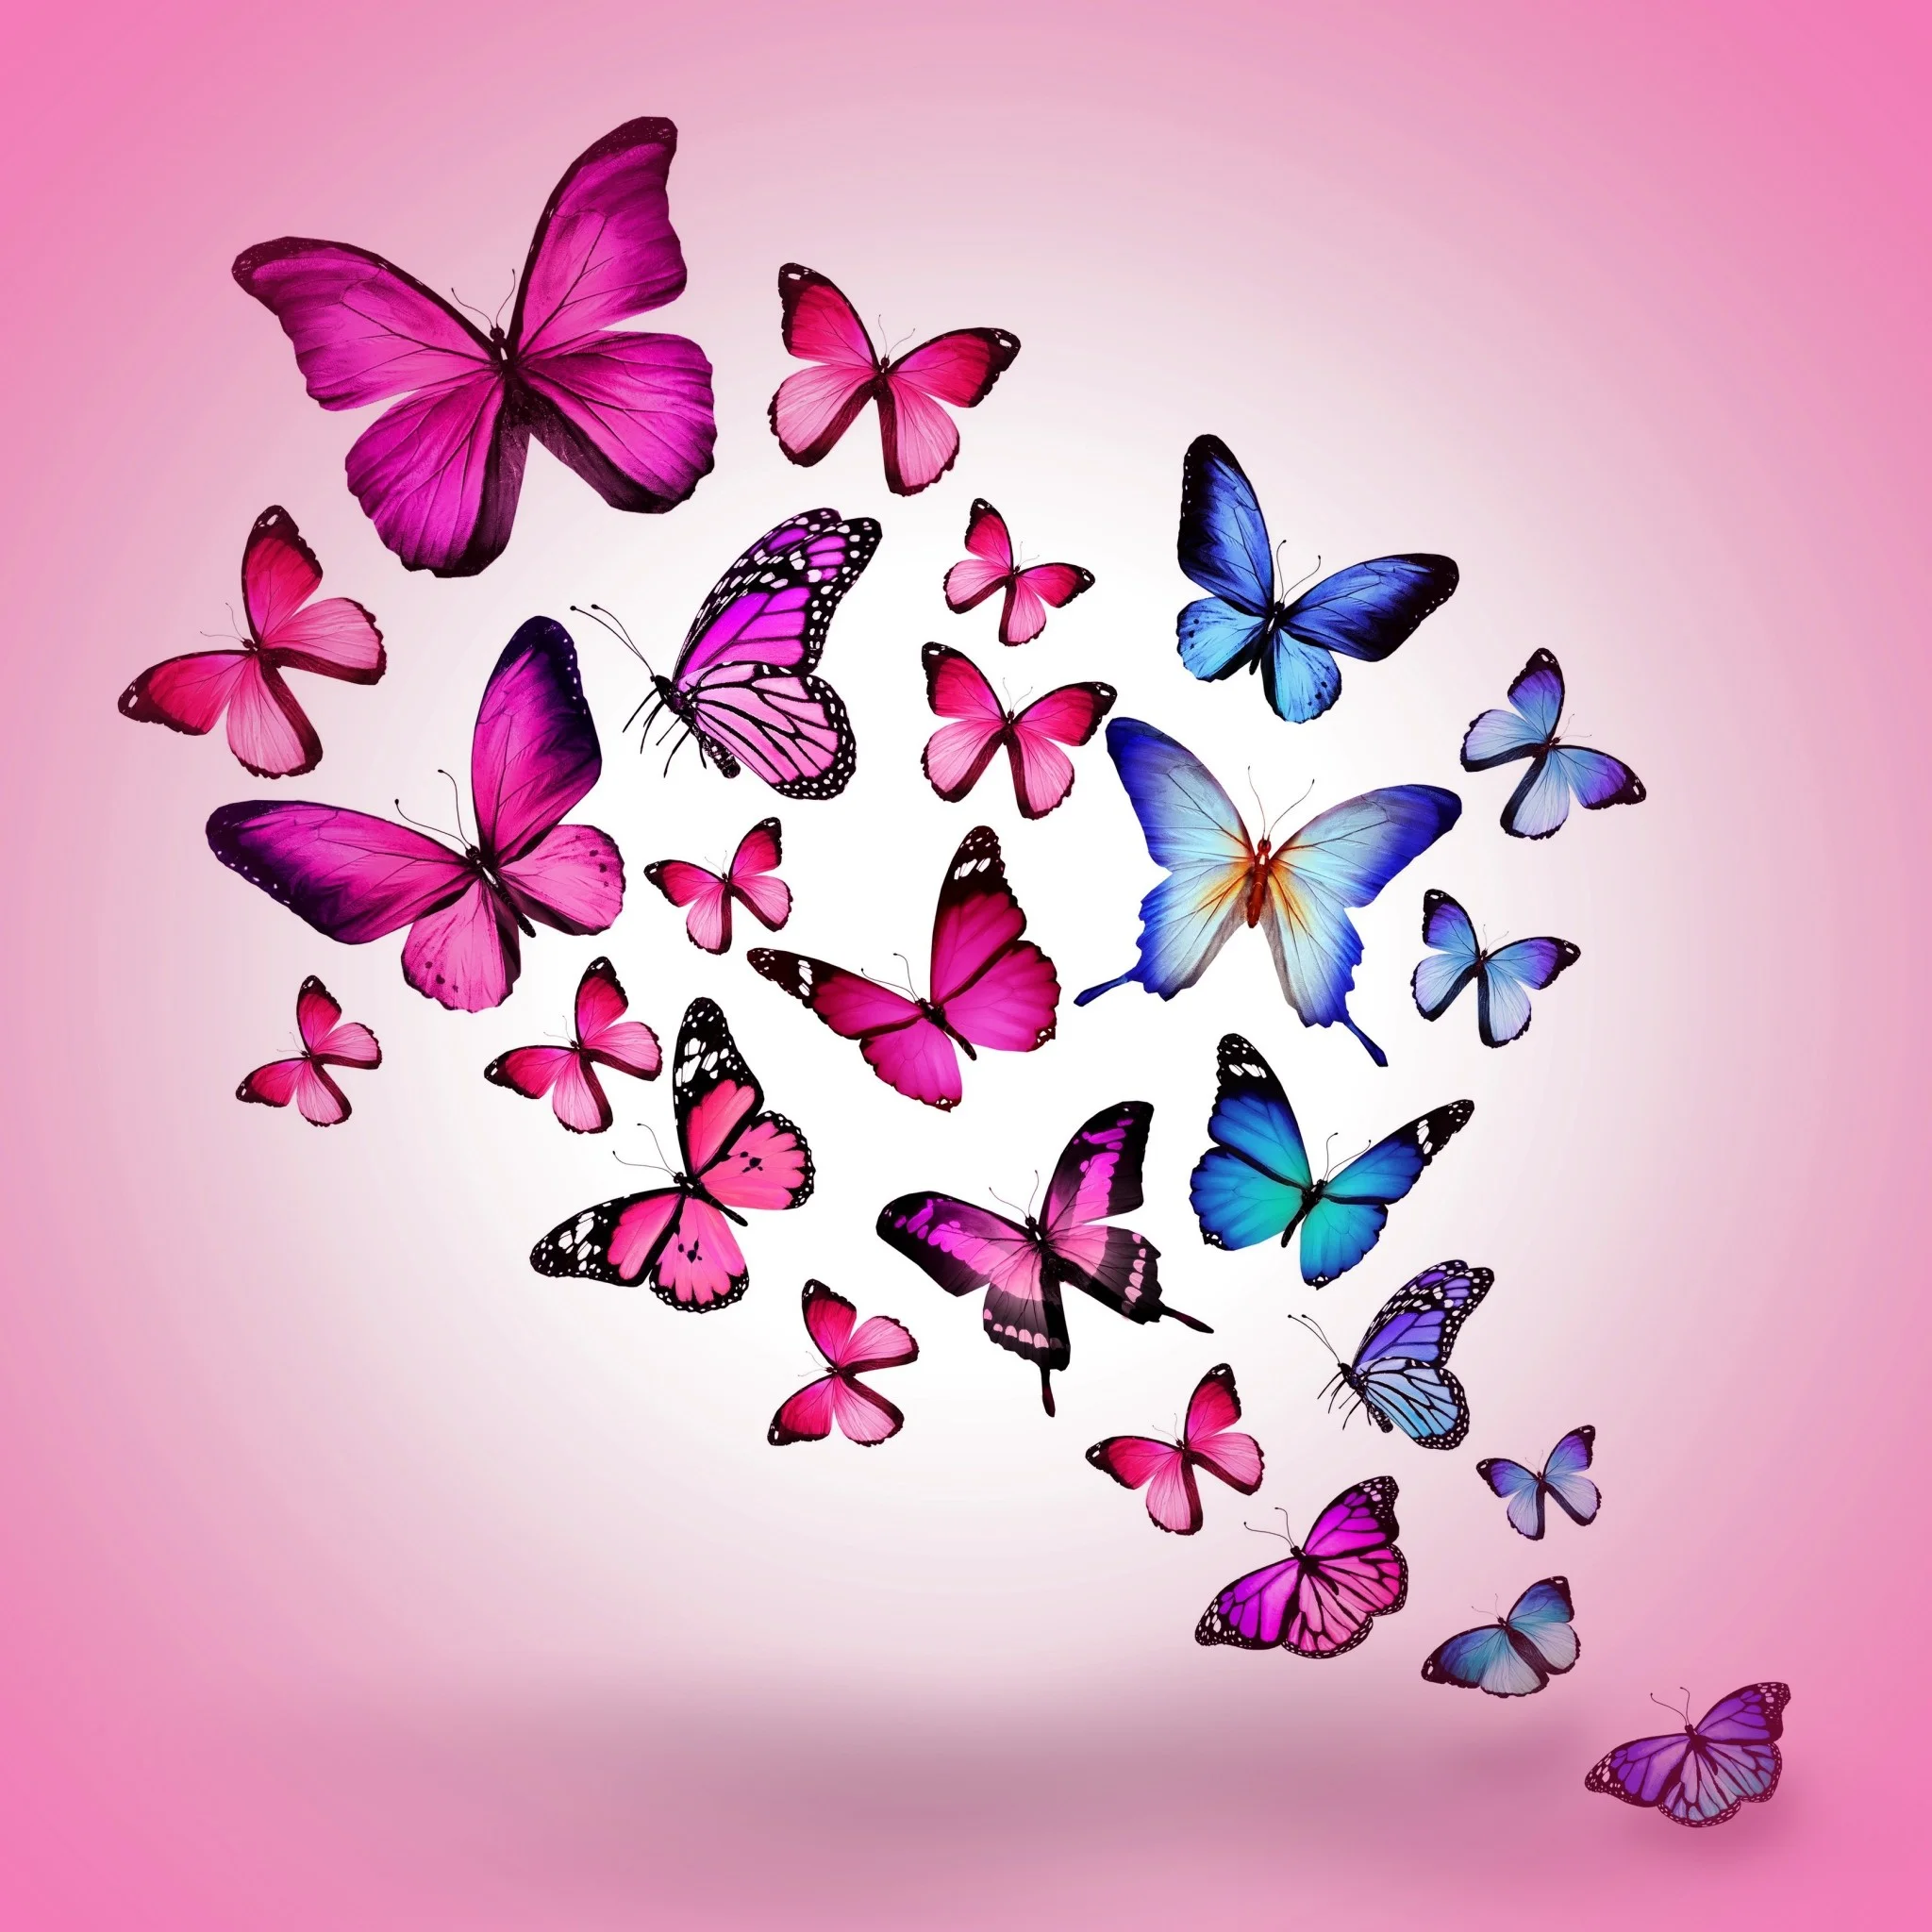 Wallpaper butterfly, drawing, flying, colorful, background, pink